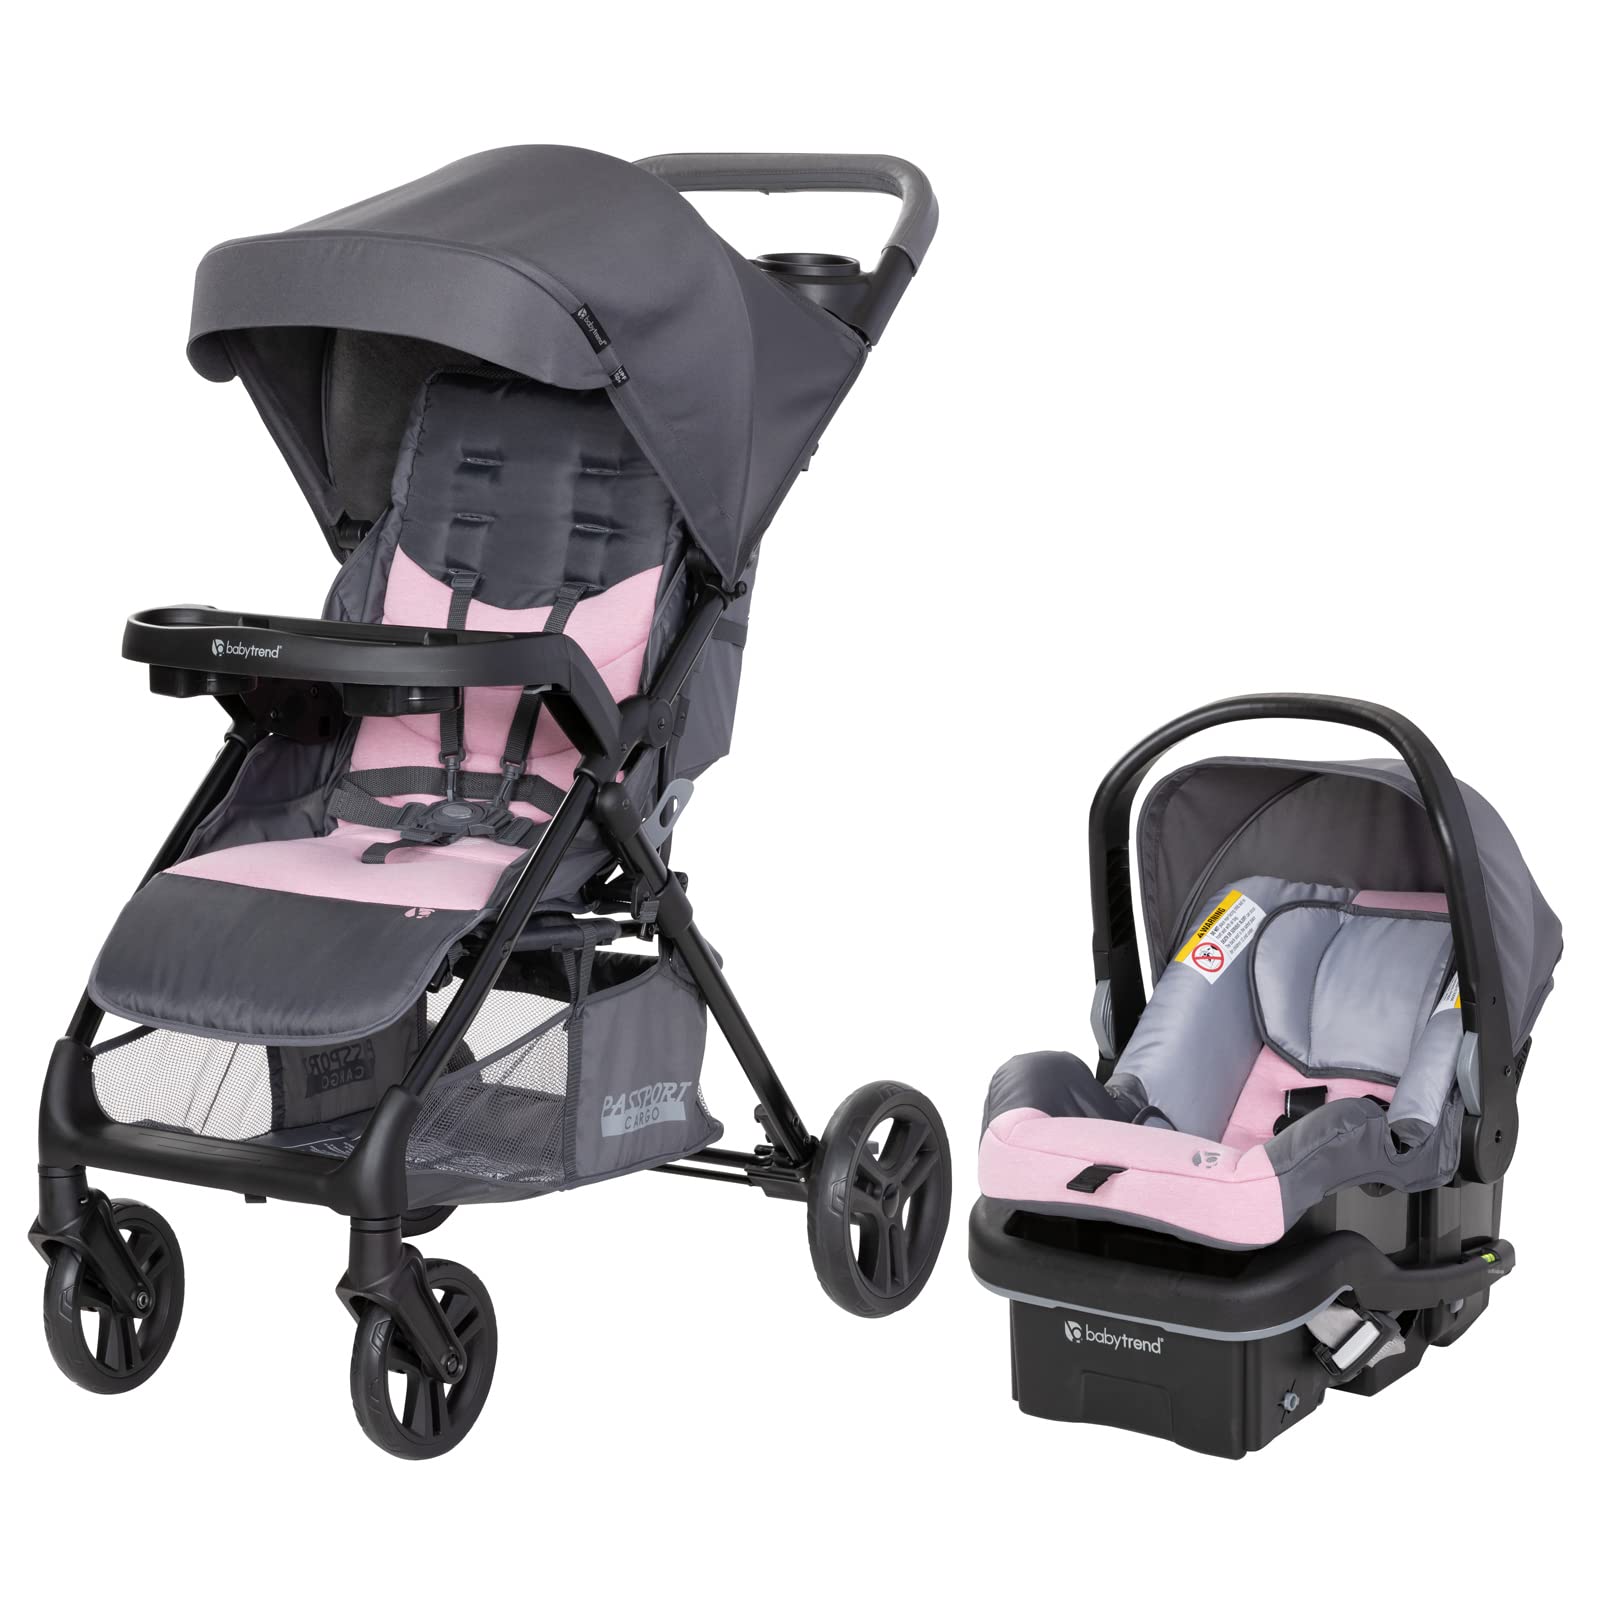 Baby Trend Passport Cargo Travel System (with EZ-Lift™ Plus Infant Car Seat)